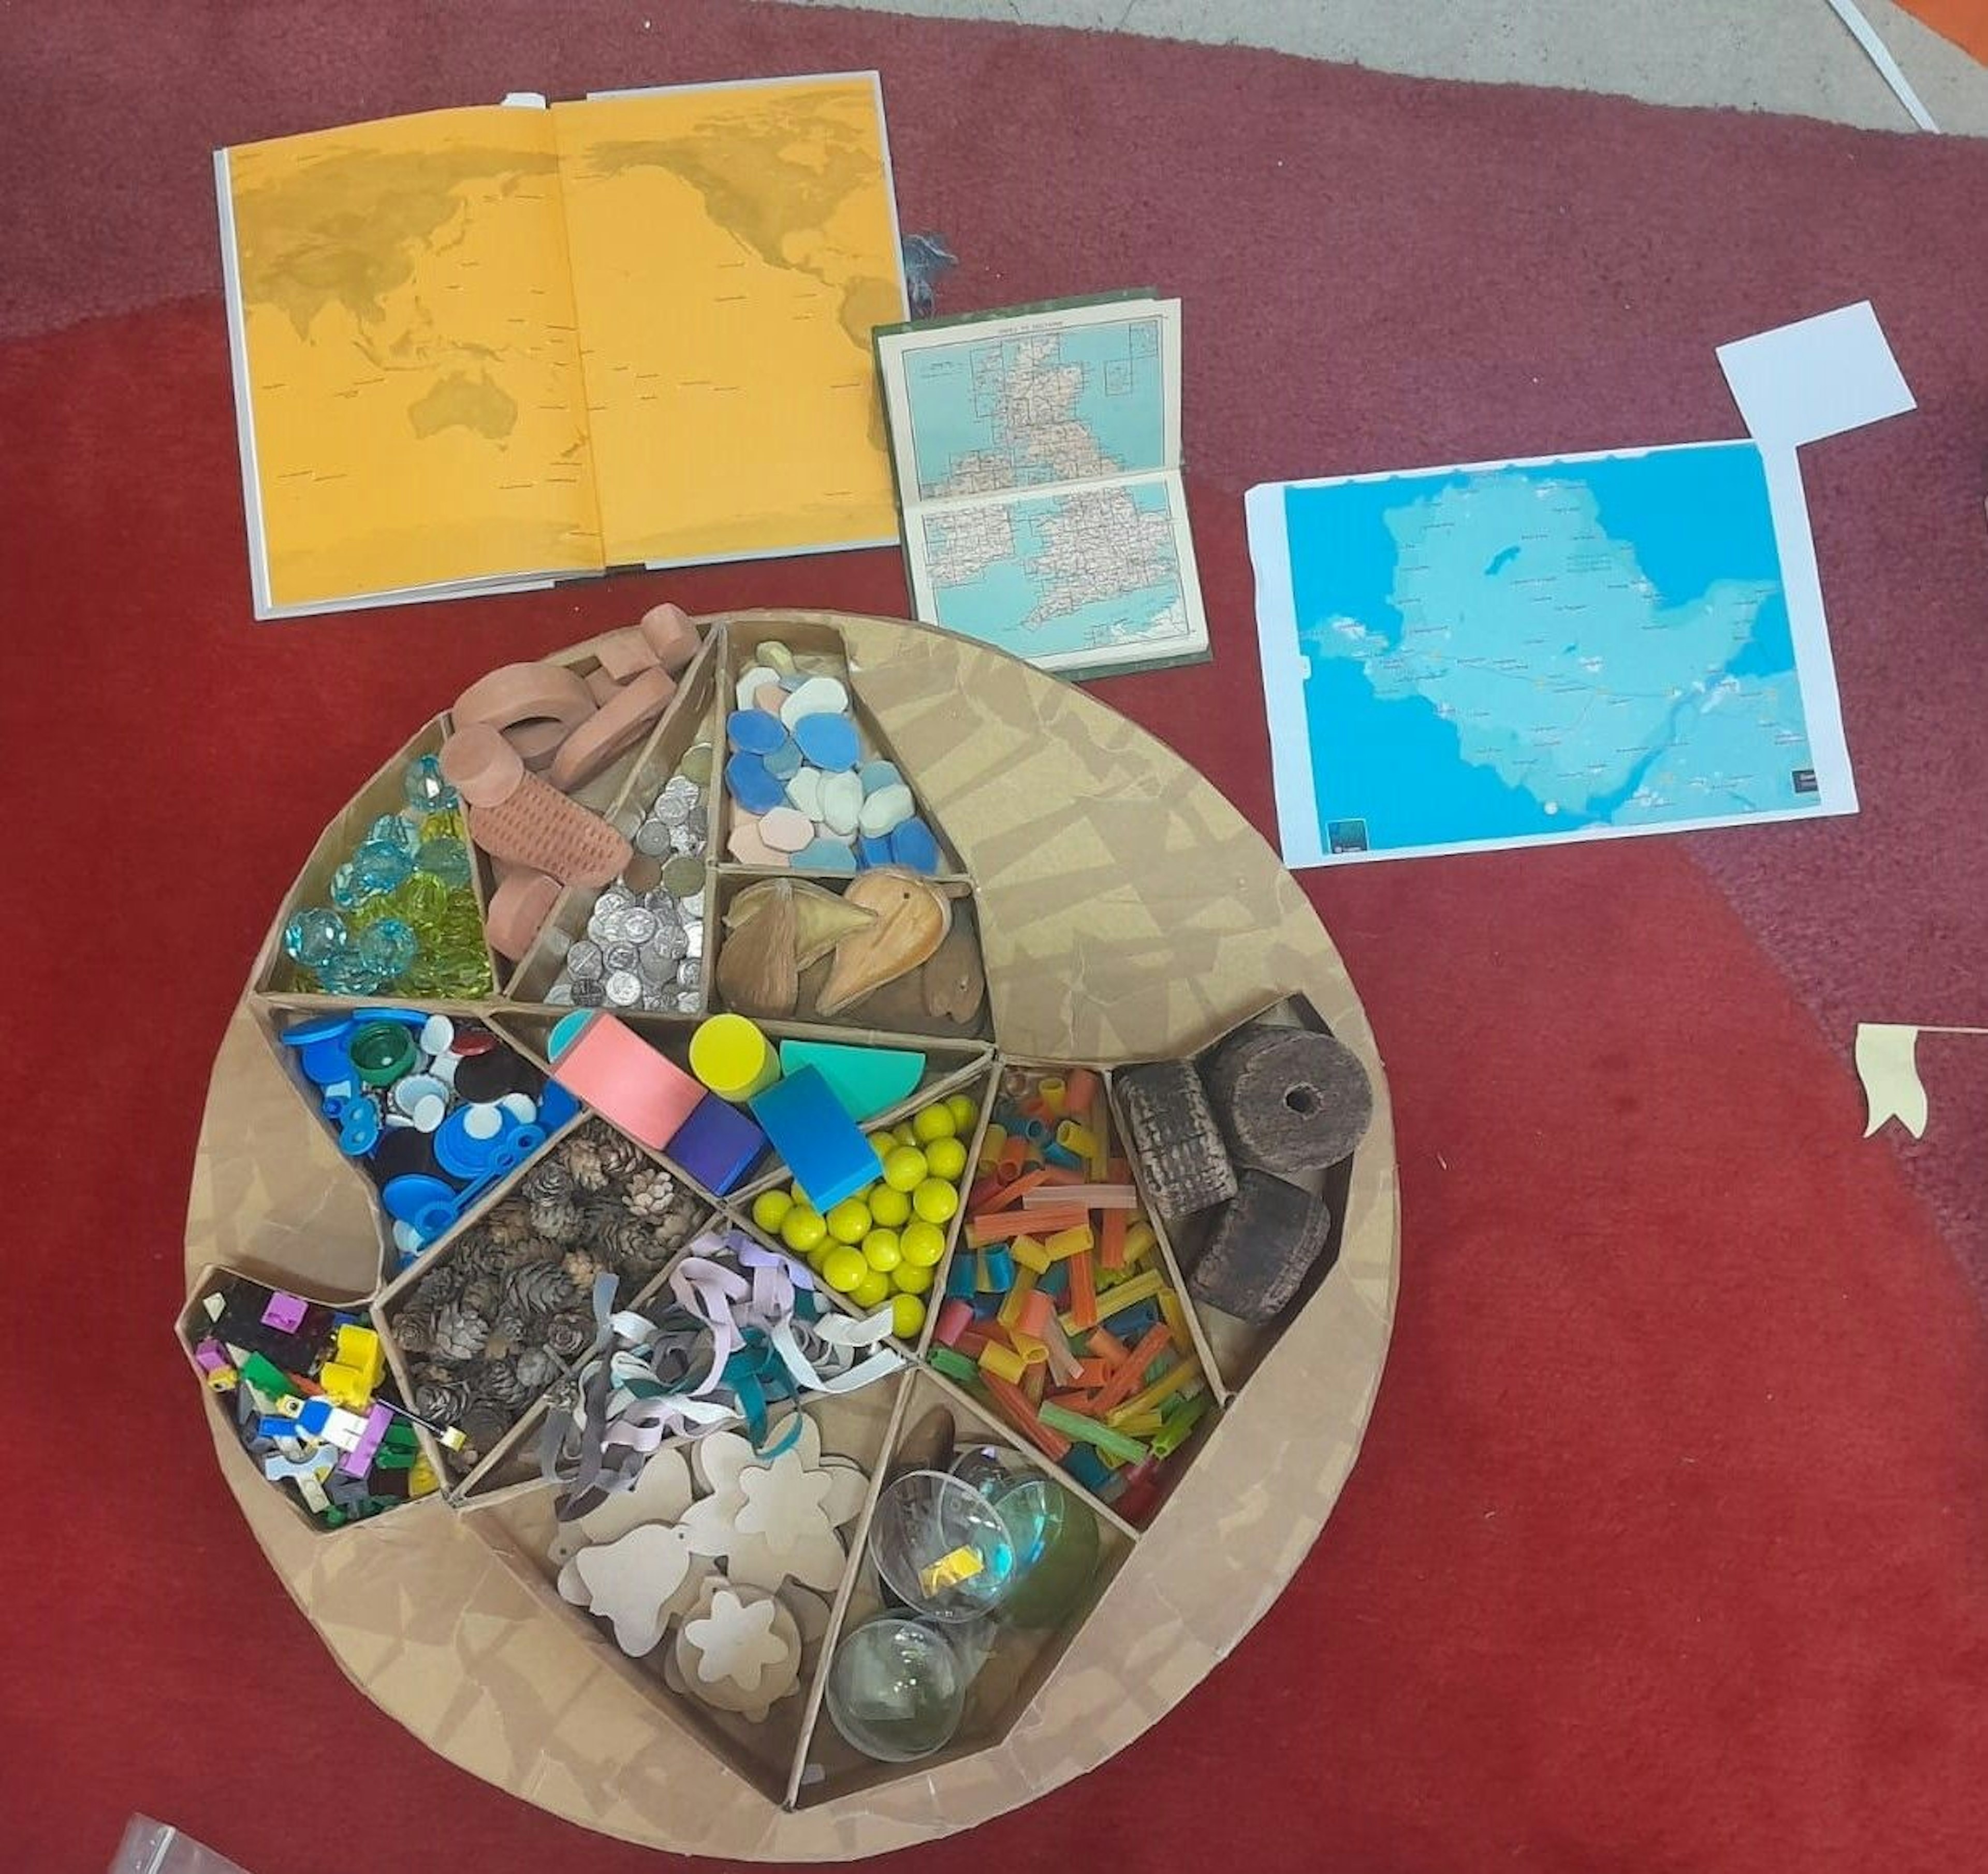 The Mandala of Ynys Môn: An outline model of Ynys Môn made of cardboard. The inside of it is divided into sections, each part filled with a different  kind of object, e.g., corks, spectacle lenses, stones, LEGO, stones, pine cones, marbles and shoelaces. 